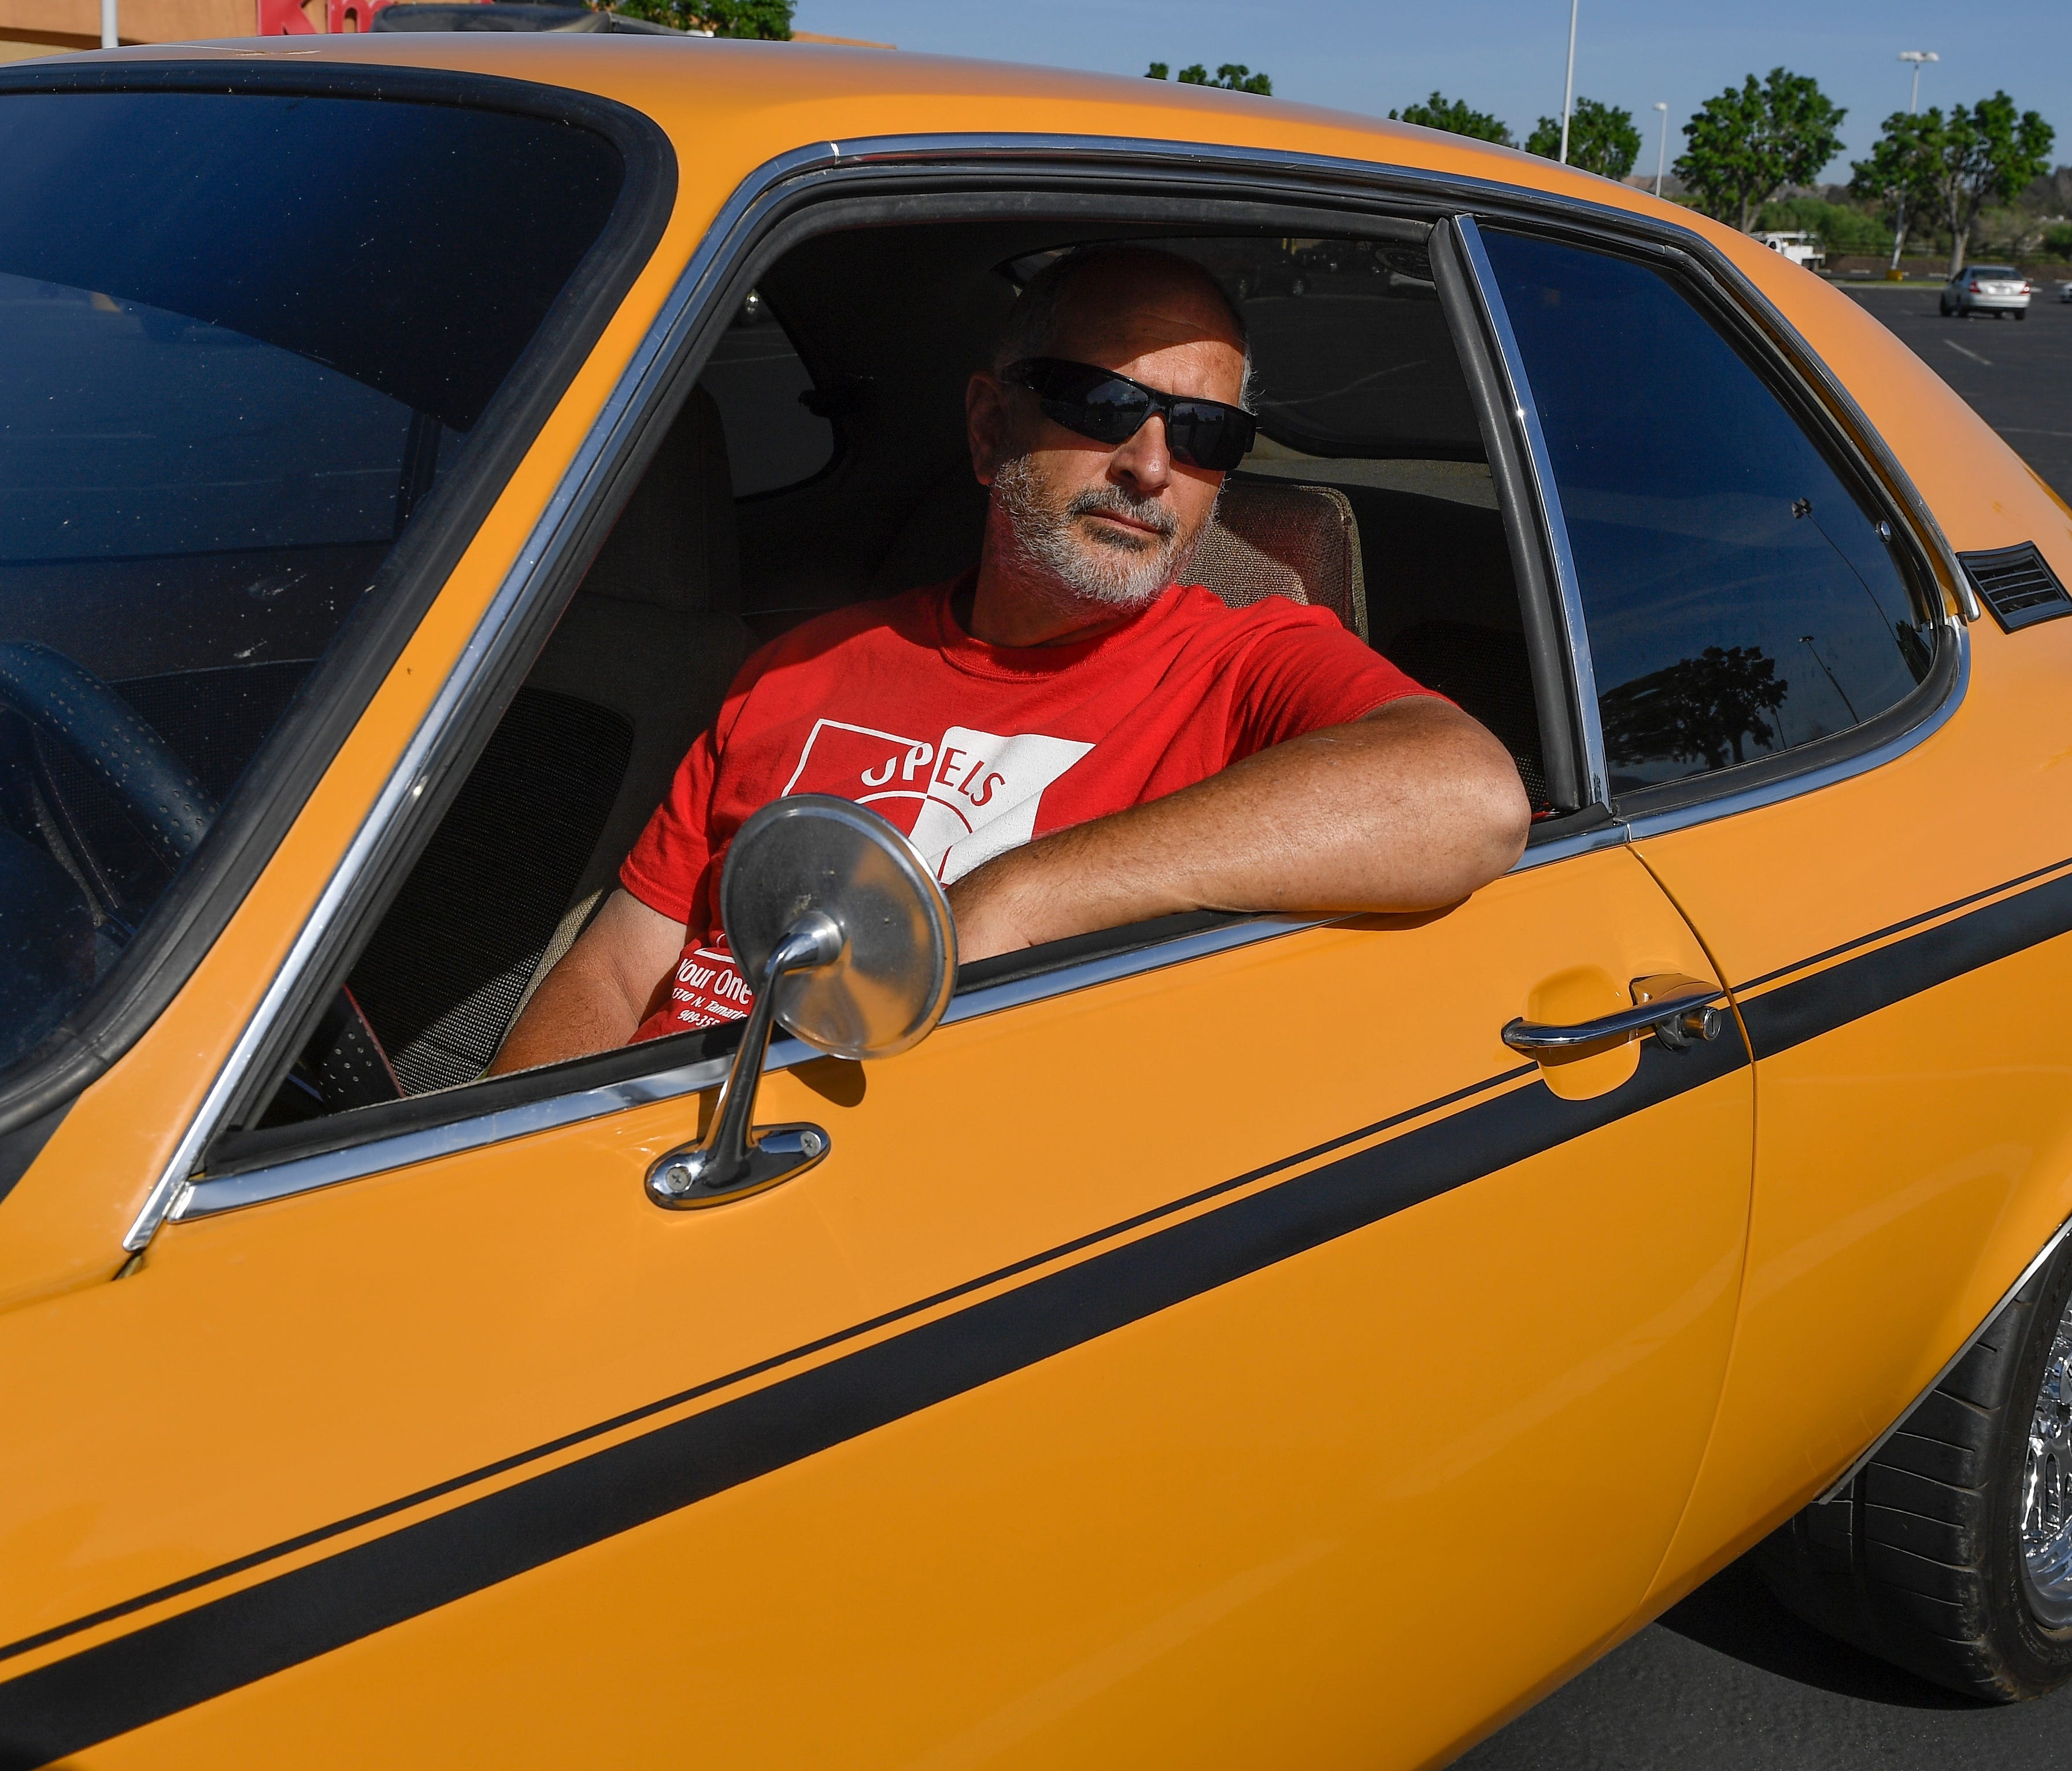 Chris Alviani with his restored 1972 Opel 1900 Manta at the 